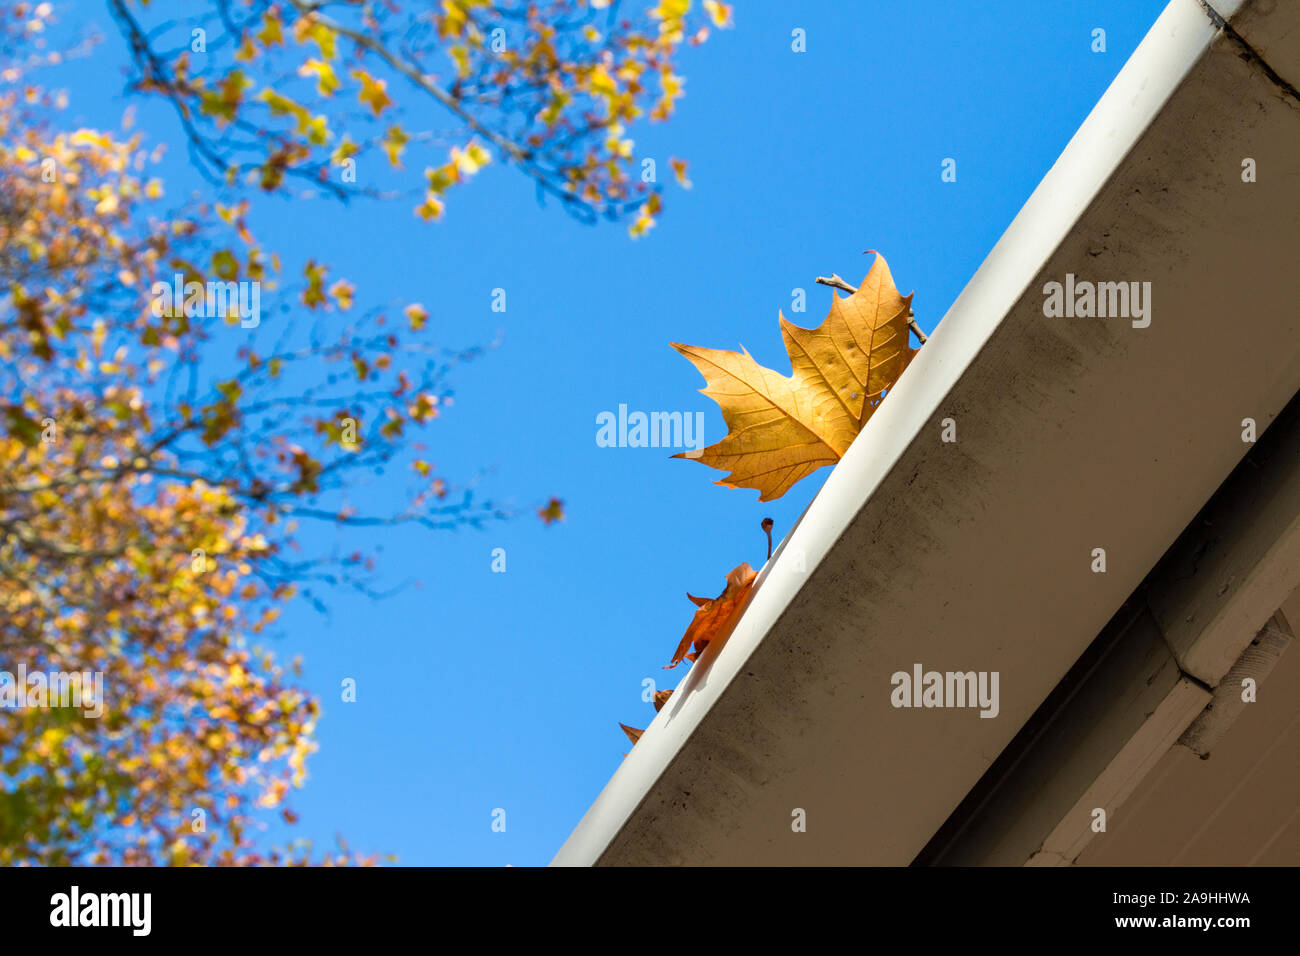 Autumn leaf of London plane tree Platanus x acerifolia on roof gutter shot from below, Sopron, Hungary Stock Photo